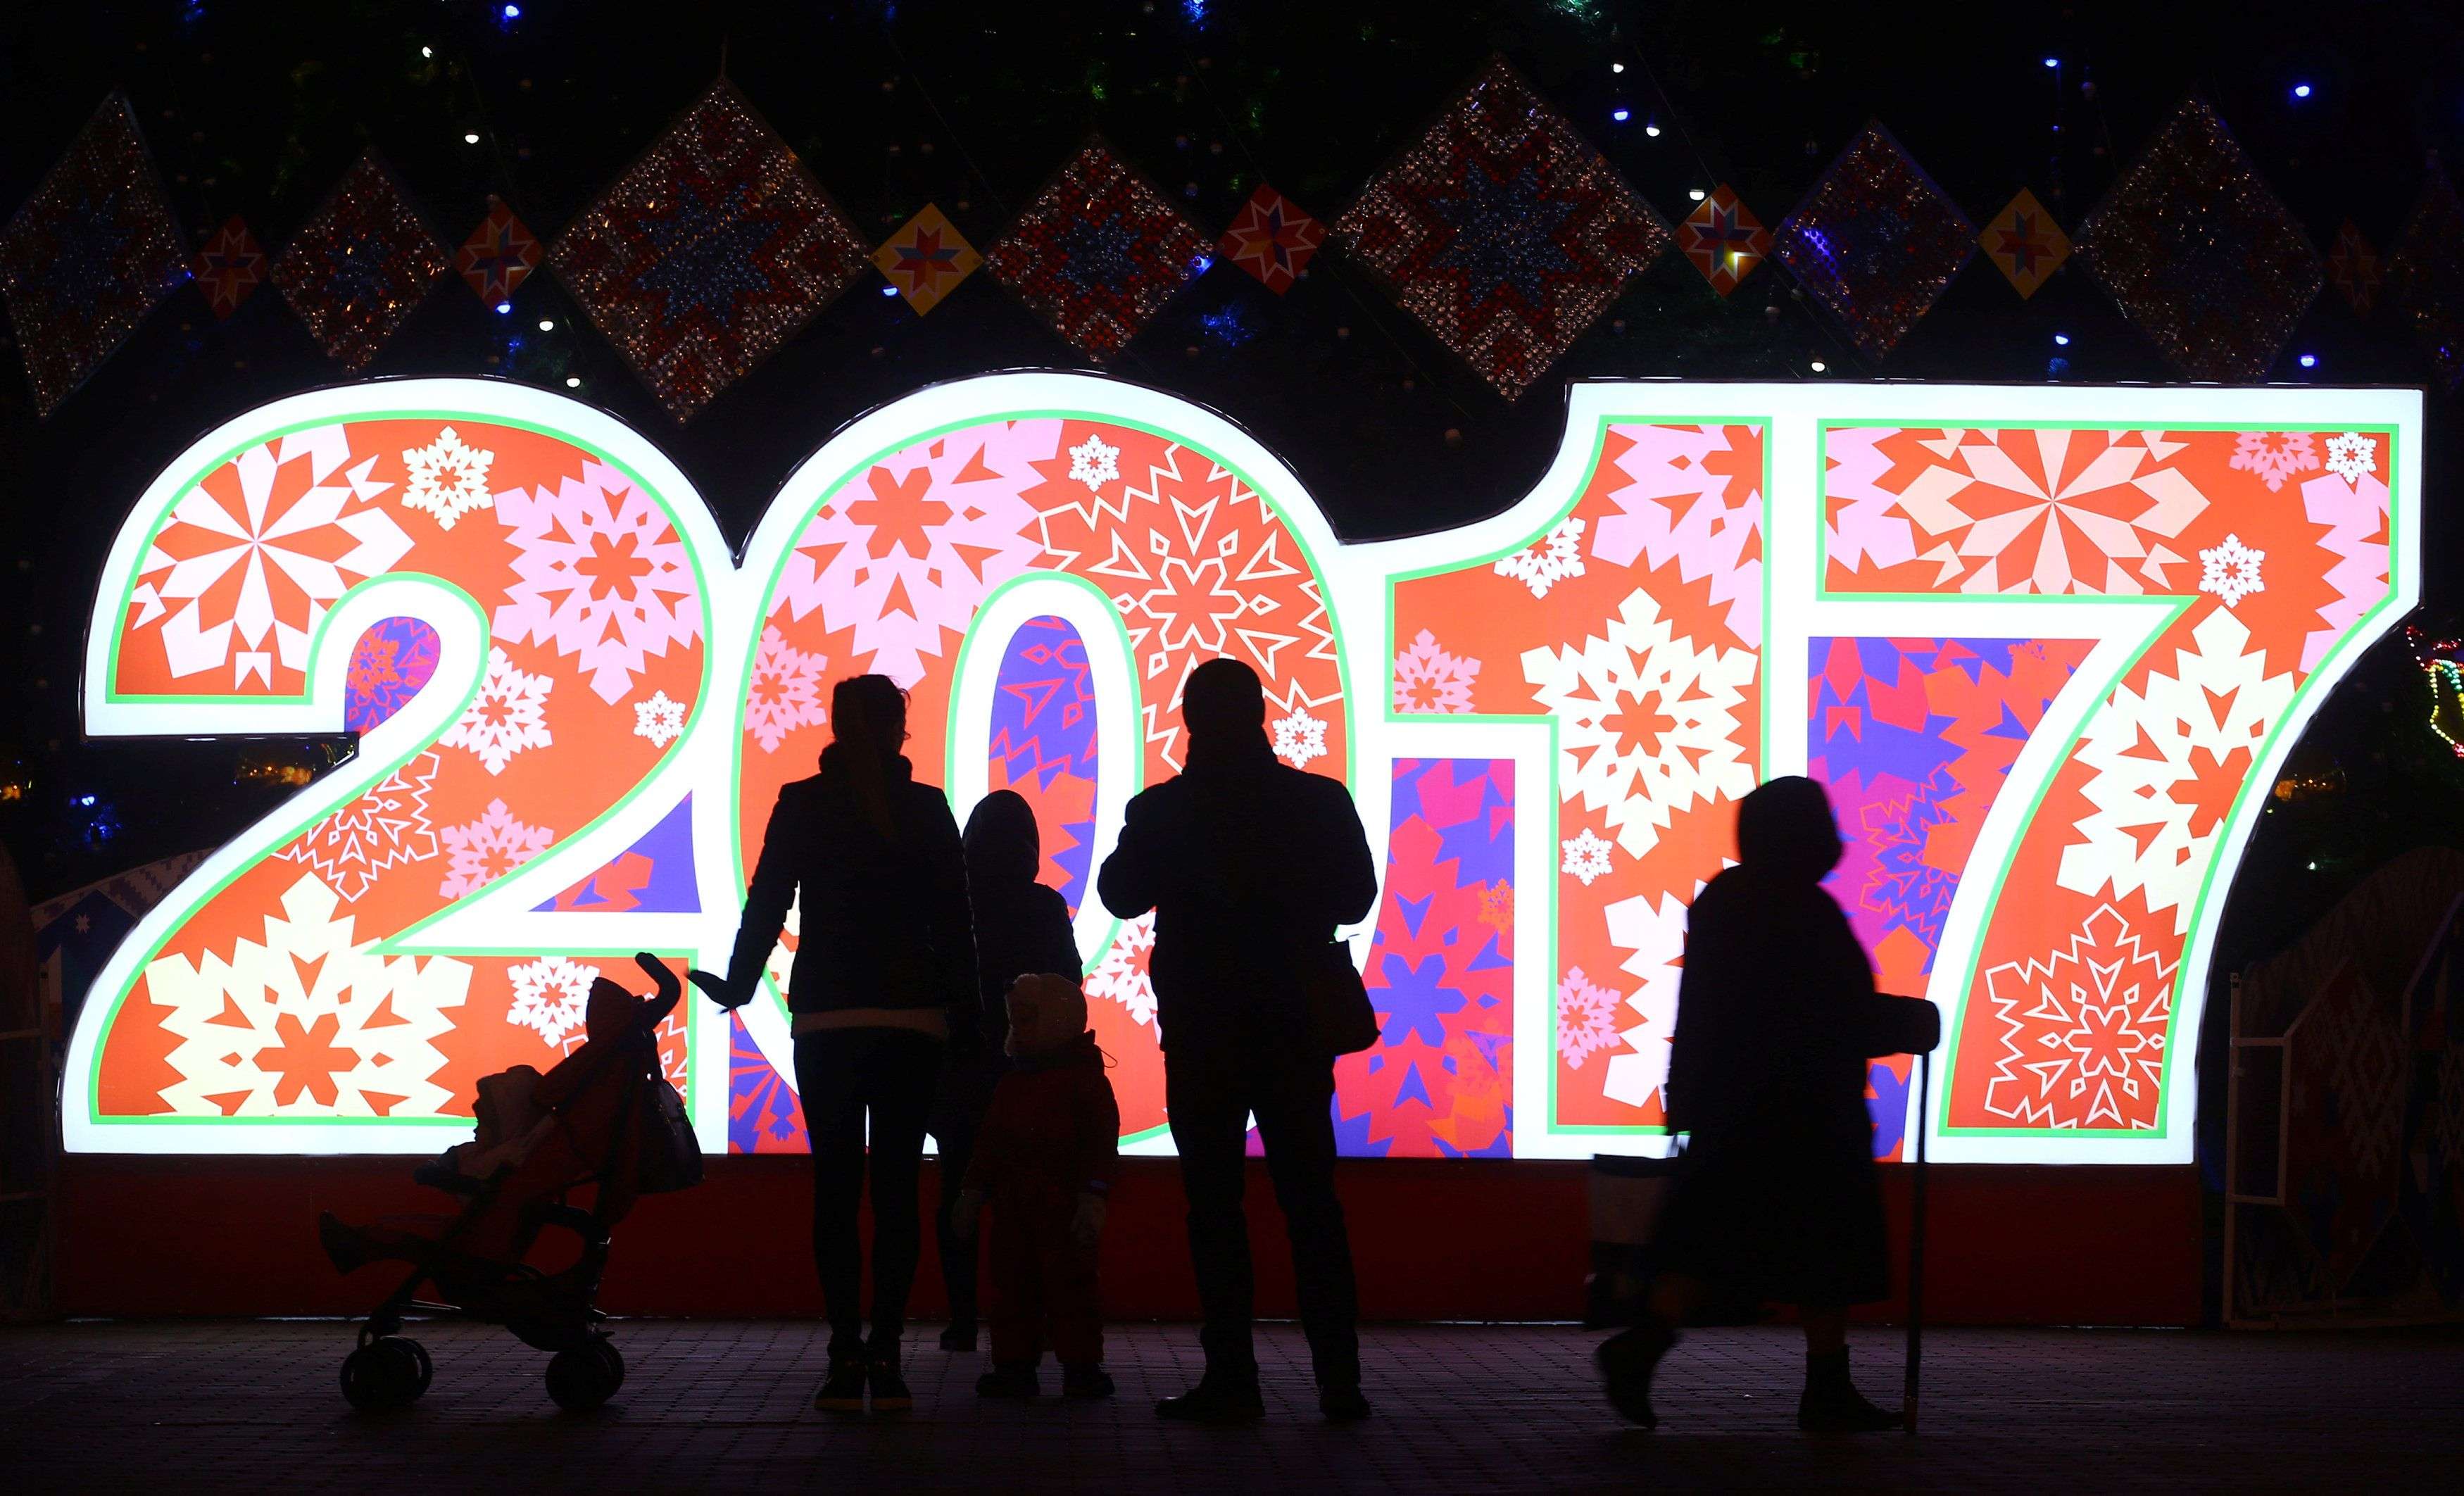 People are seen in front of big numbers reading 2017 at Oktyabrskaya Square for the upcoming New Year and Christmas season in Minsk